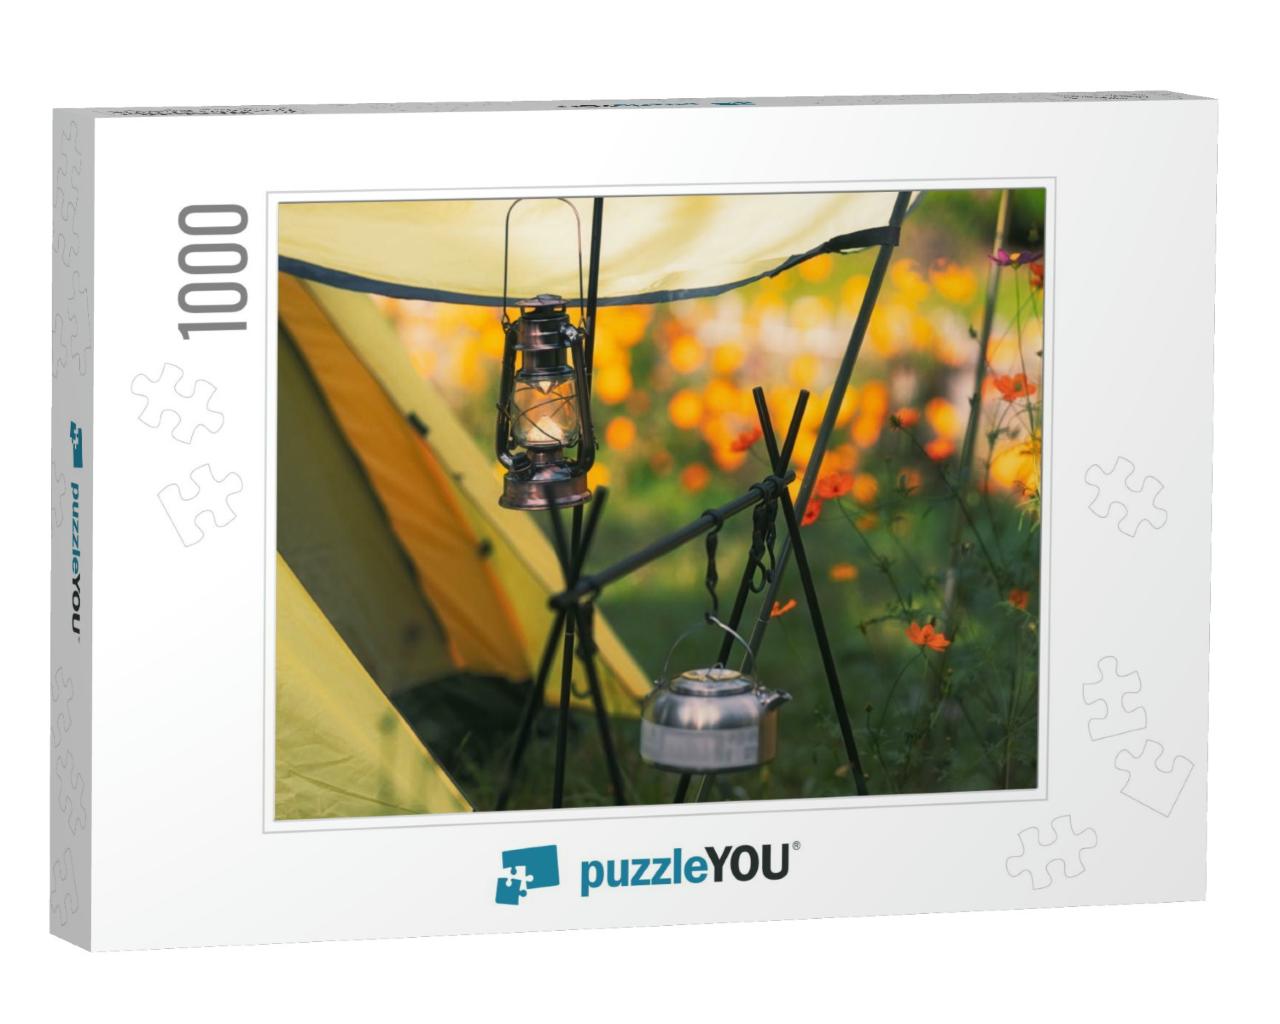 Hurricane Lamp Hang for Lighting to Camping Tent Area in... Jigsaw Puzzle with 1000 pieces